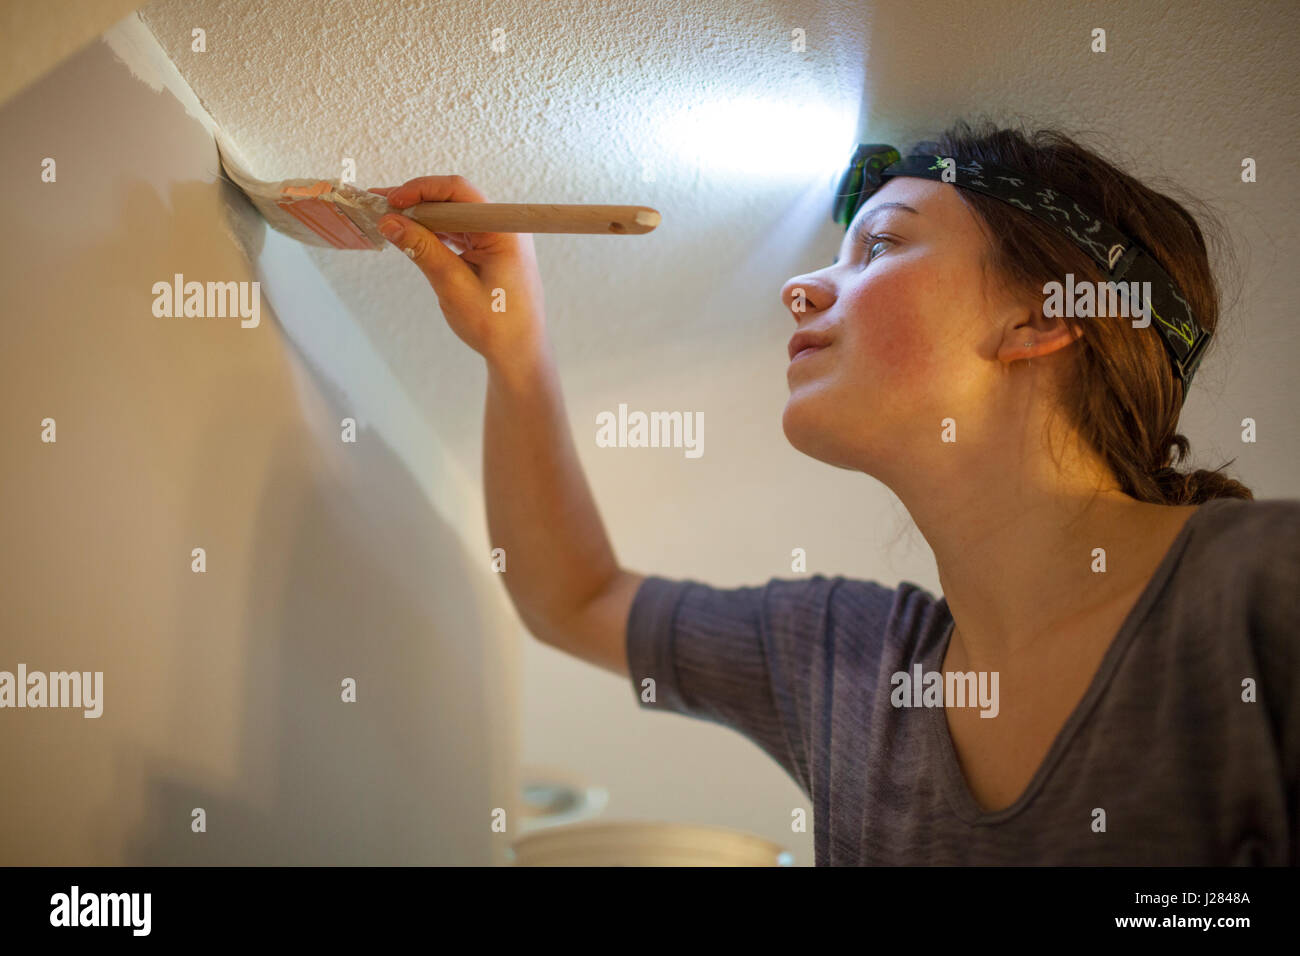 Low angle view of woman painting wall at home Stock Photo